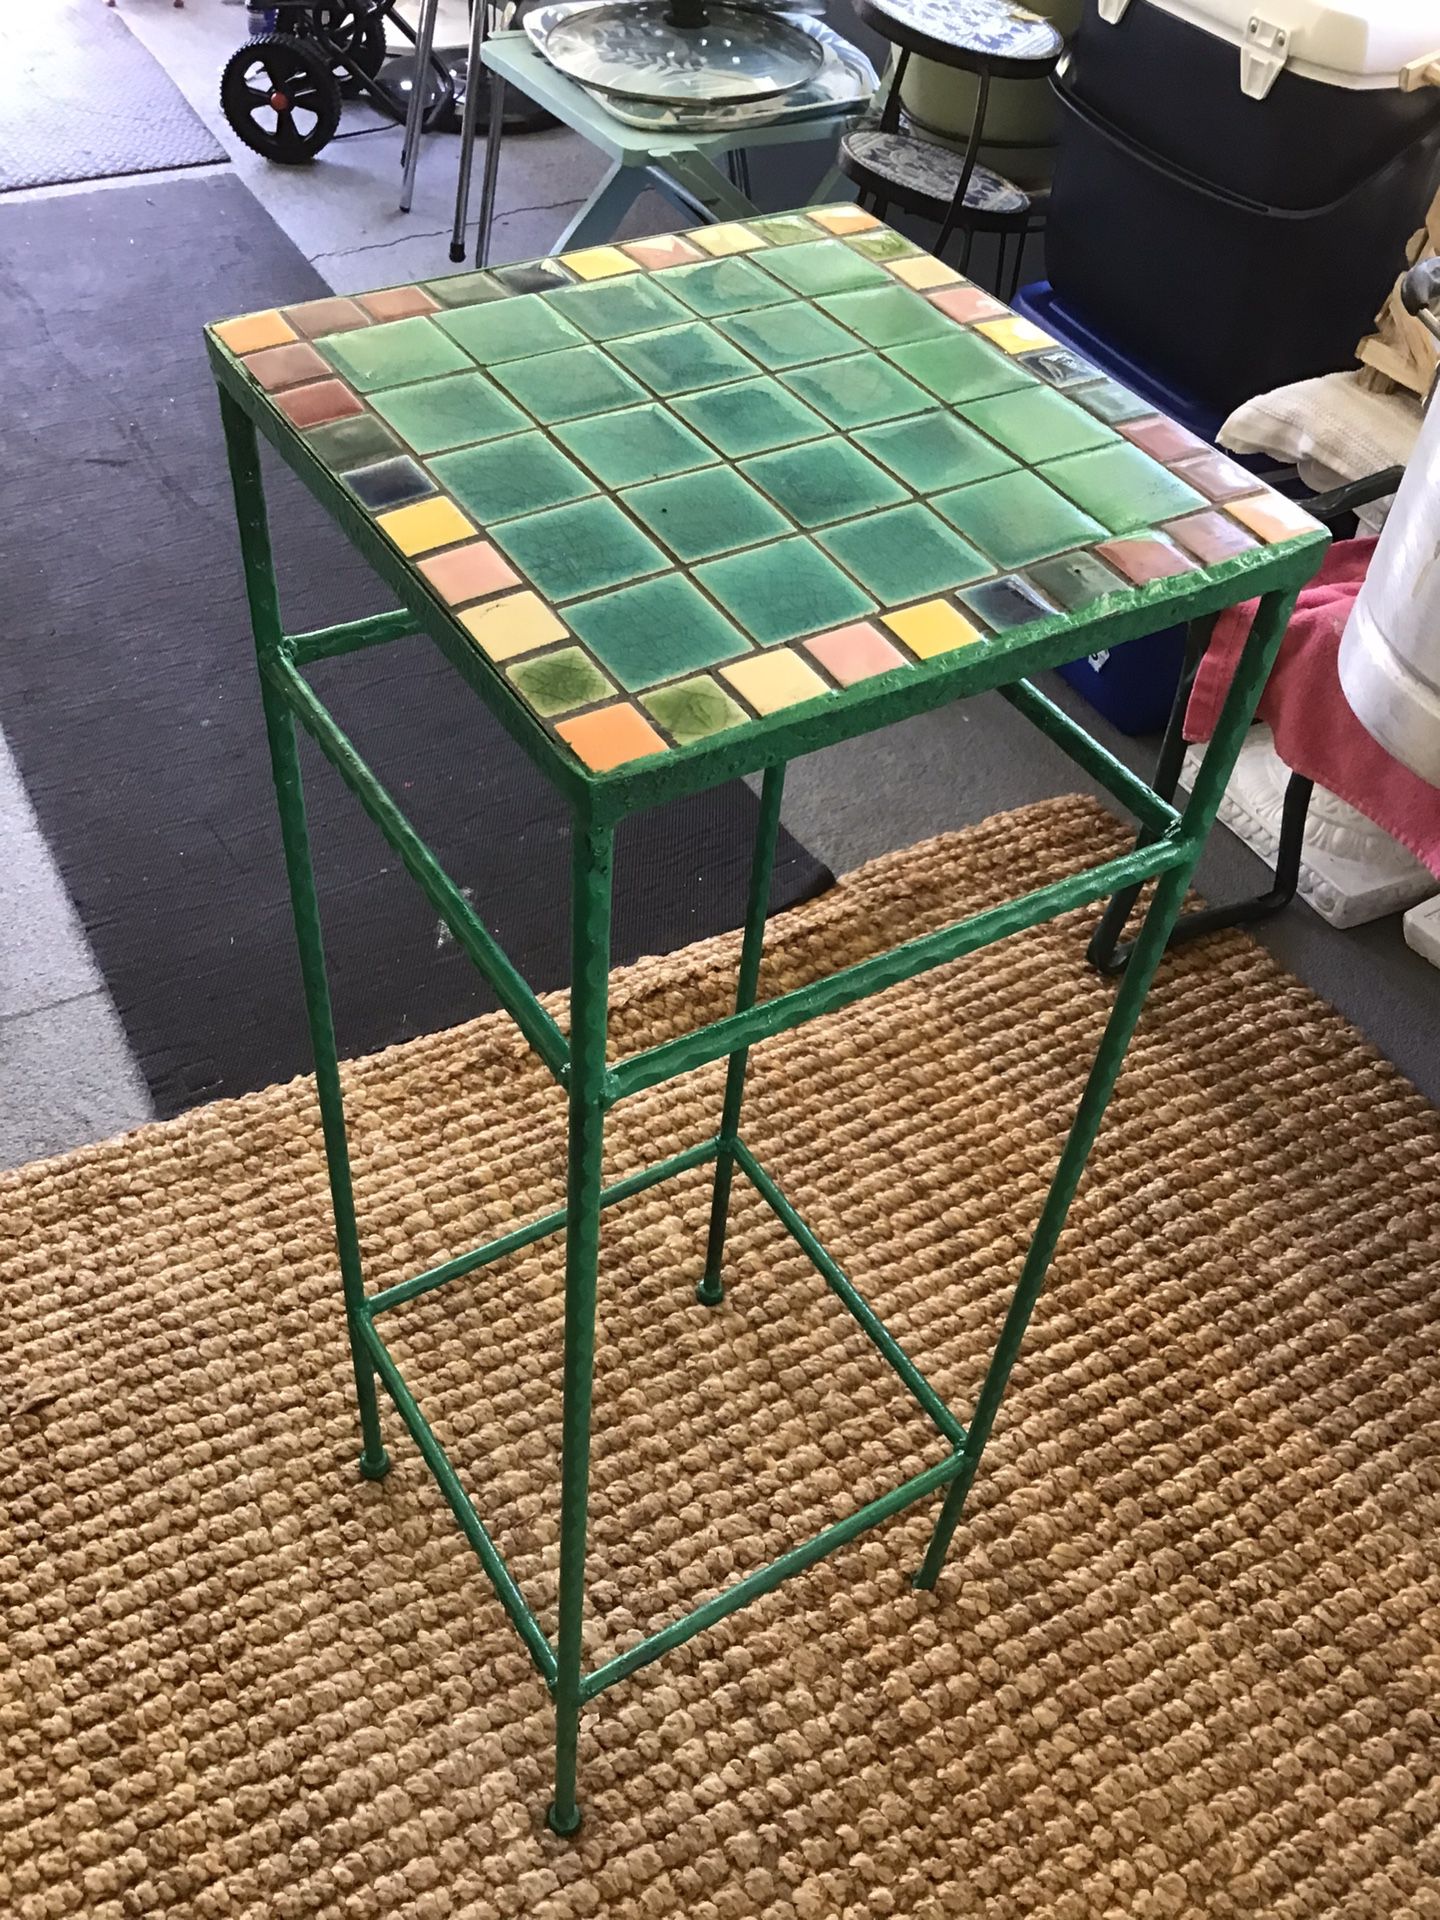 Cast Iron Tall Table Or Stand With Ceramics Tiles , Very Heavy  35 “ High Tap Is 13 “